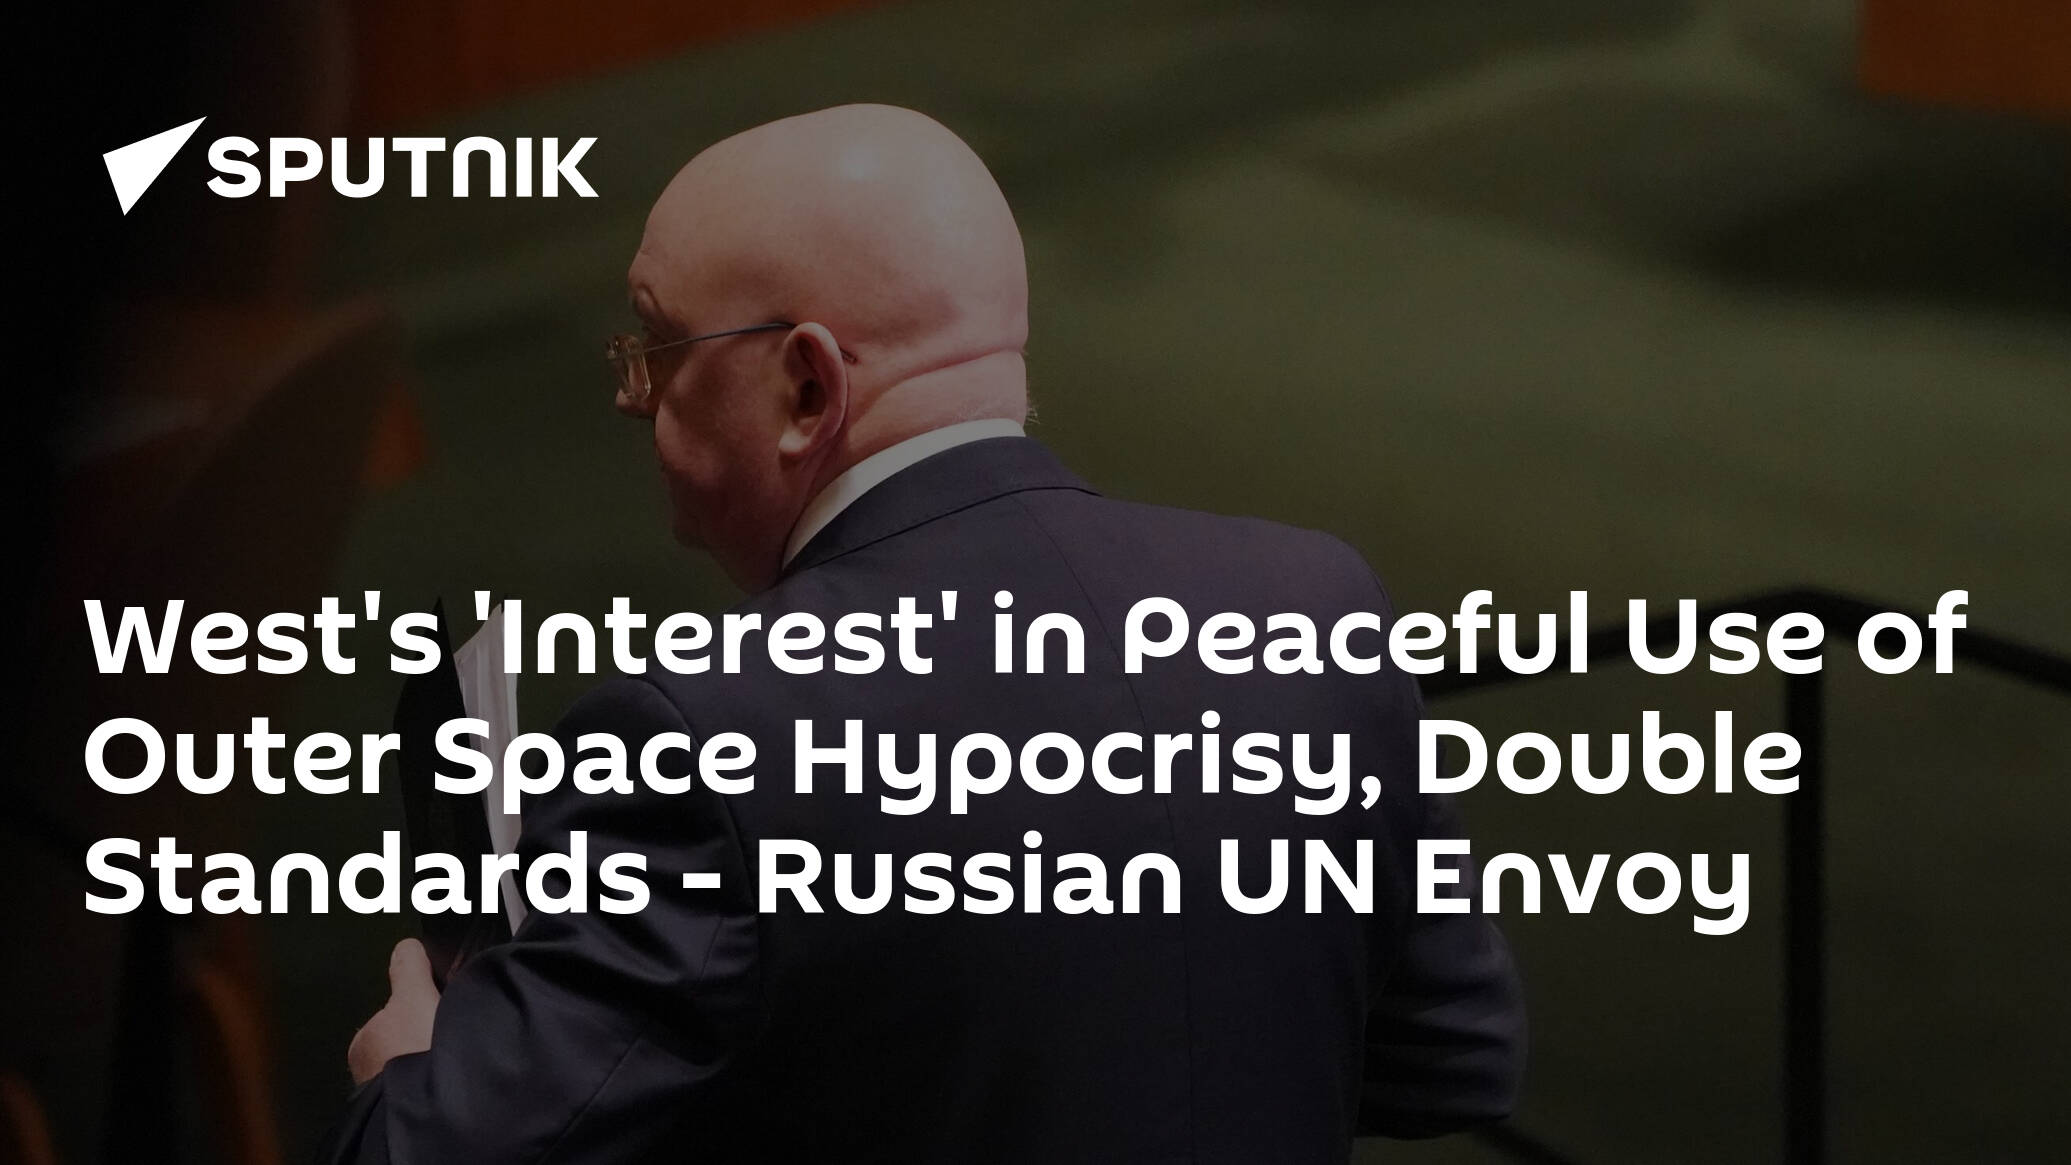 West's 'Interest' in Peaceful Use of Outer Space Hypocrisy, Double Standards – Russian UN Envoy